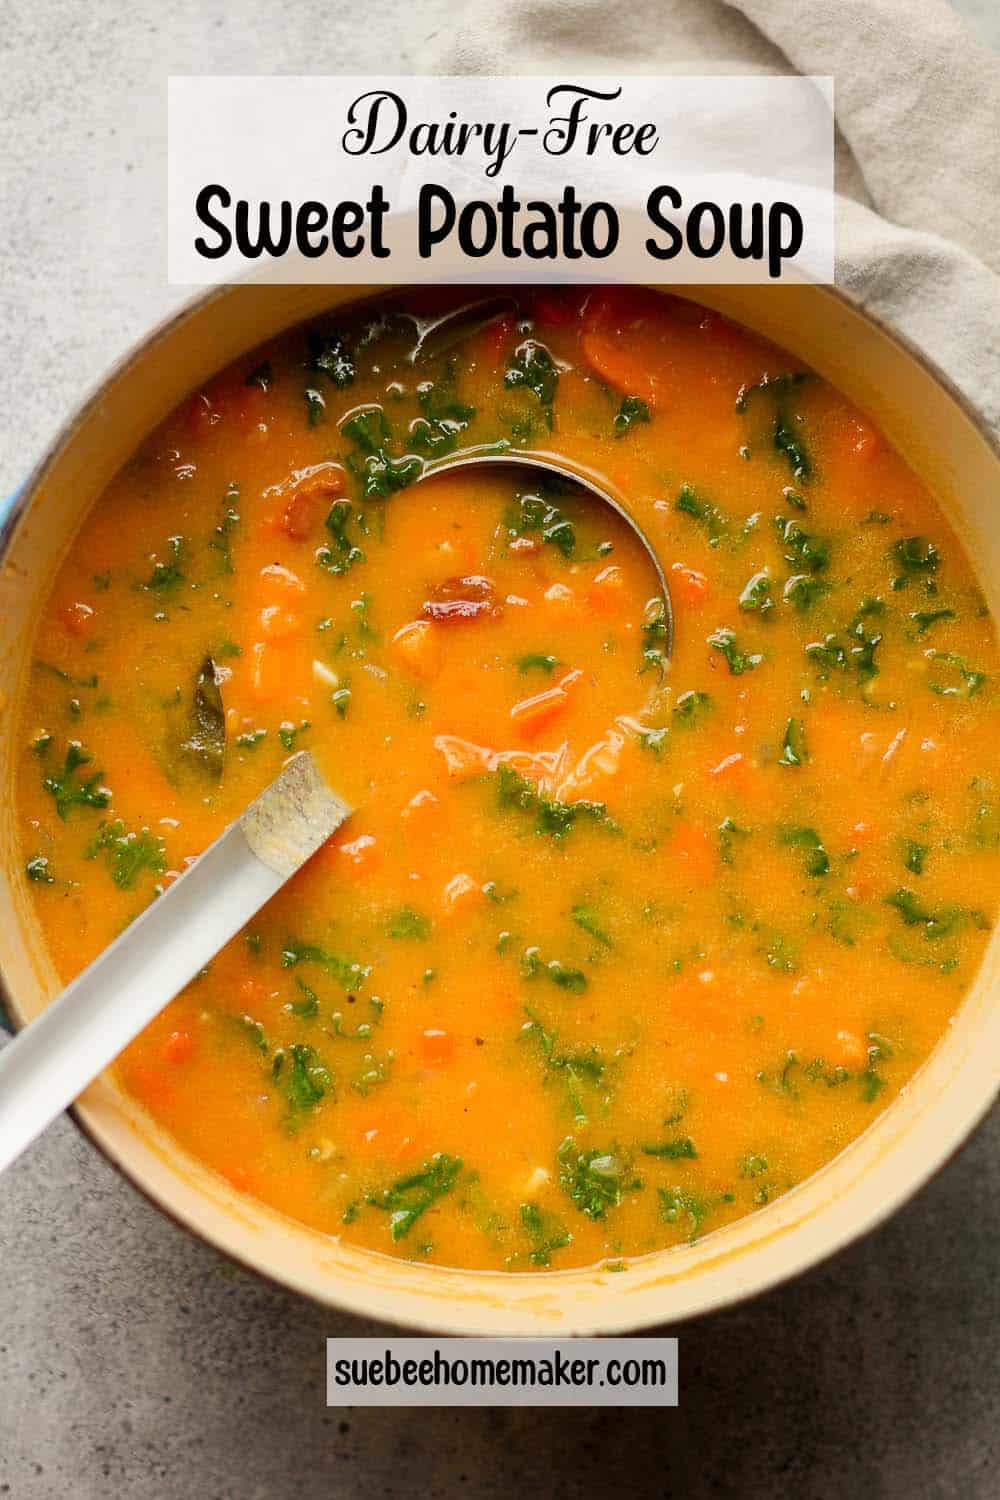 A large pot of Dairy-Free Sweet Potato Soup with a soup ladle inside.